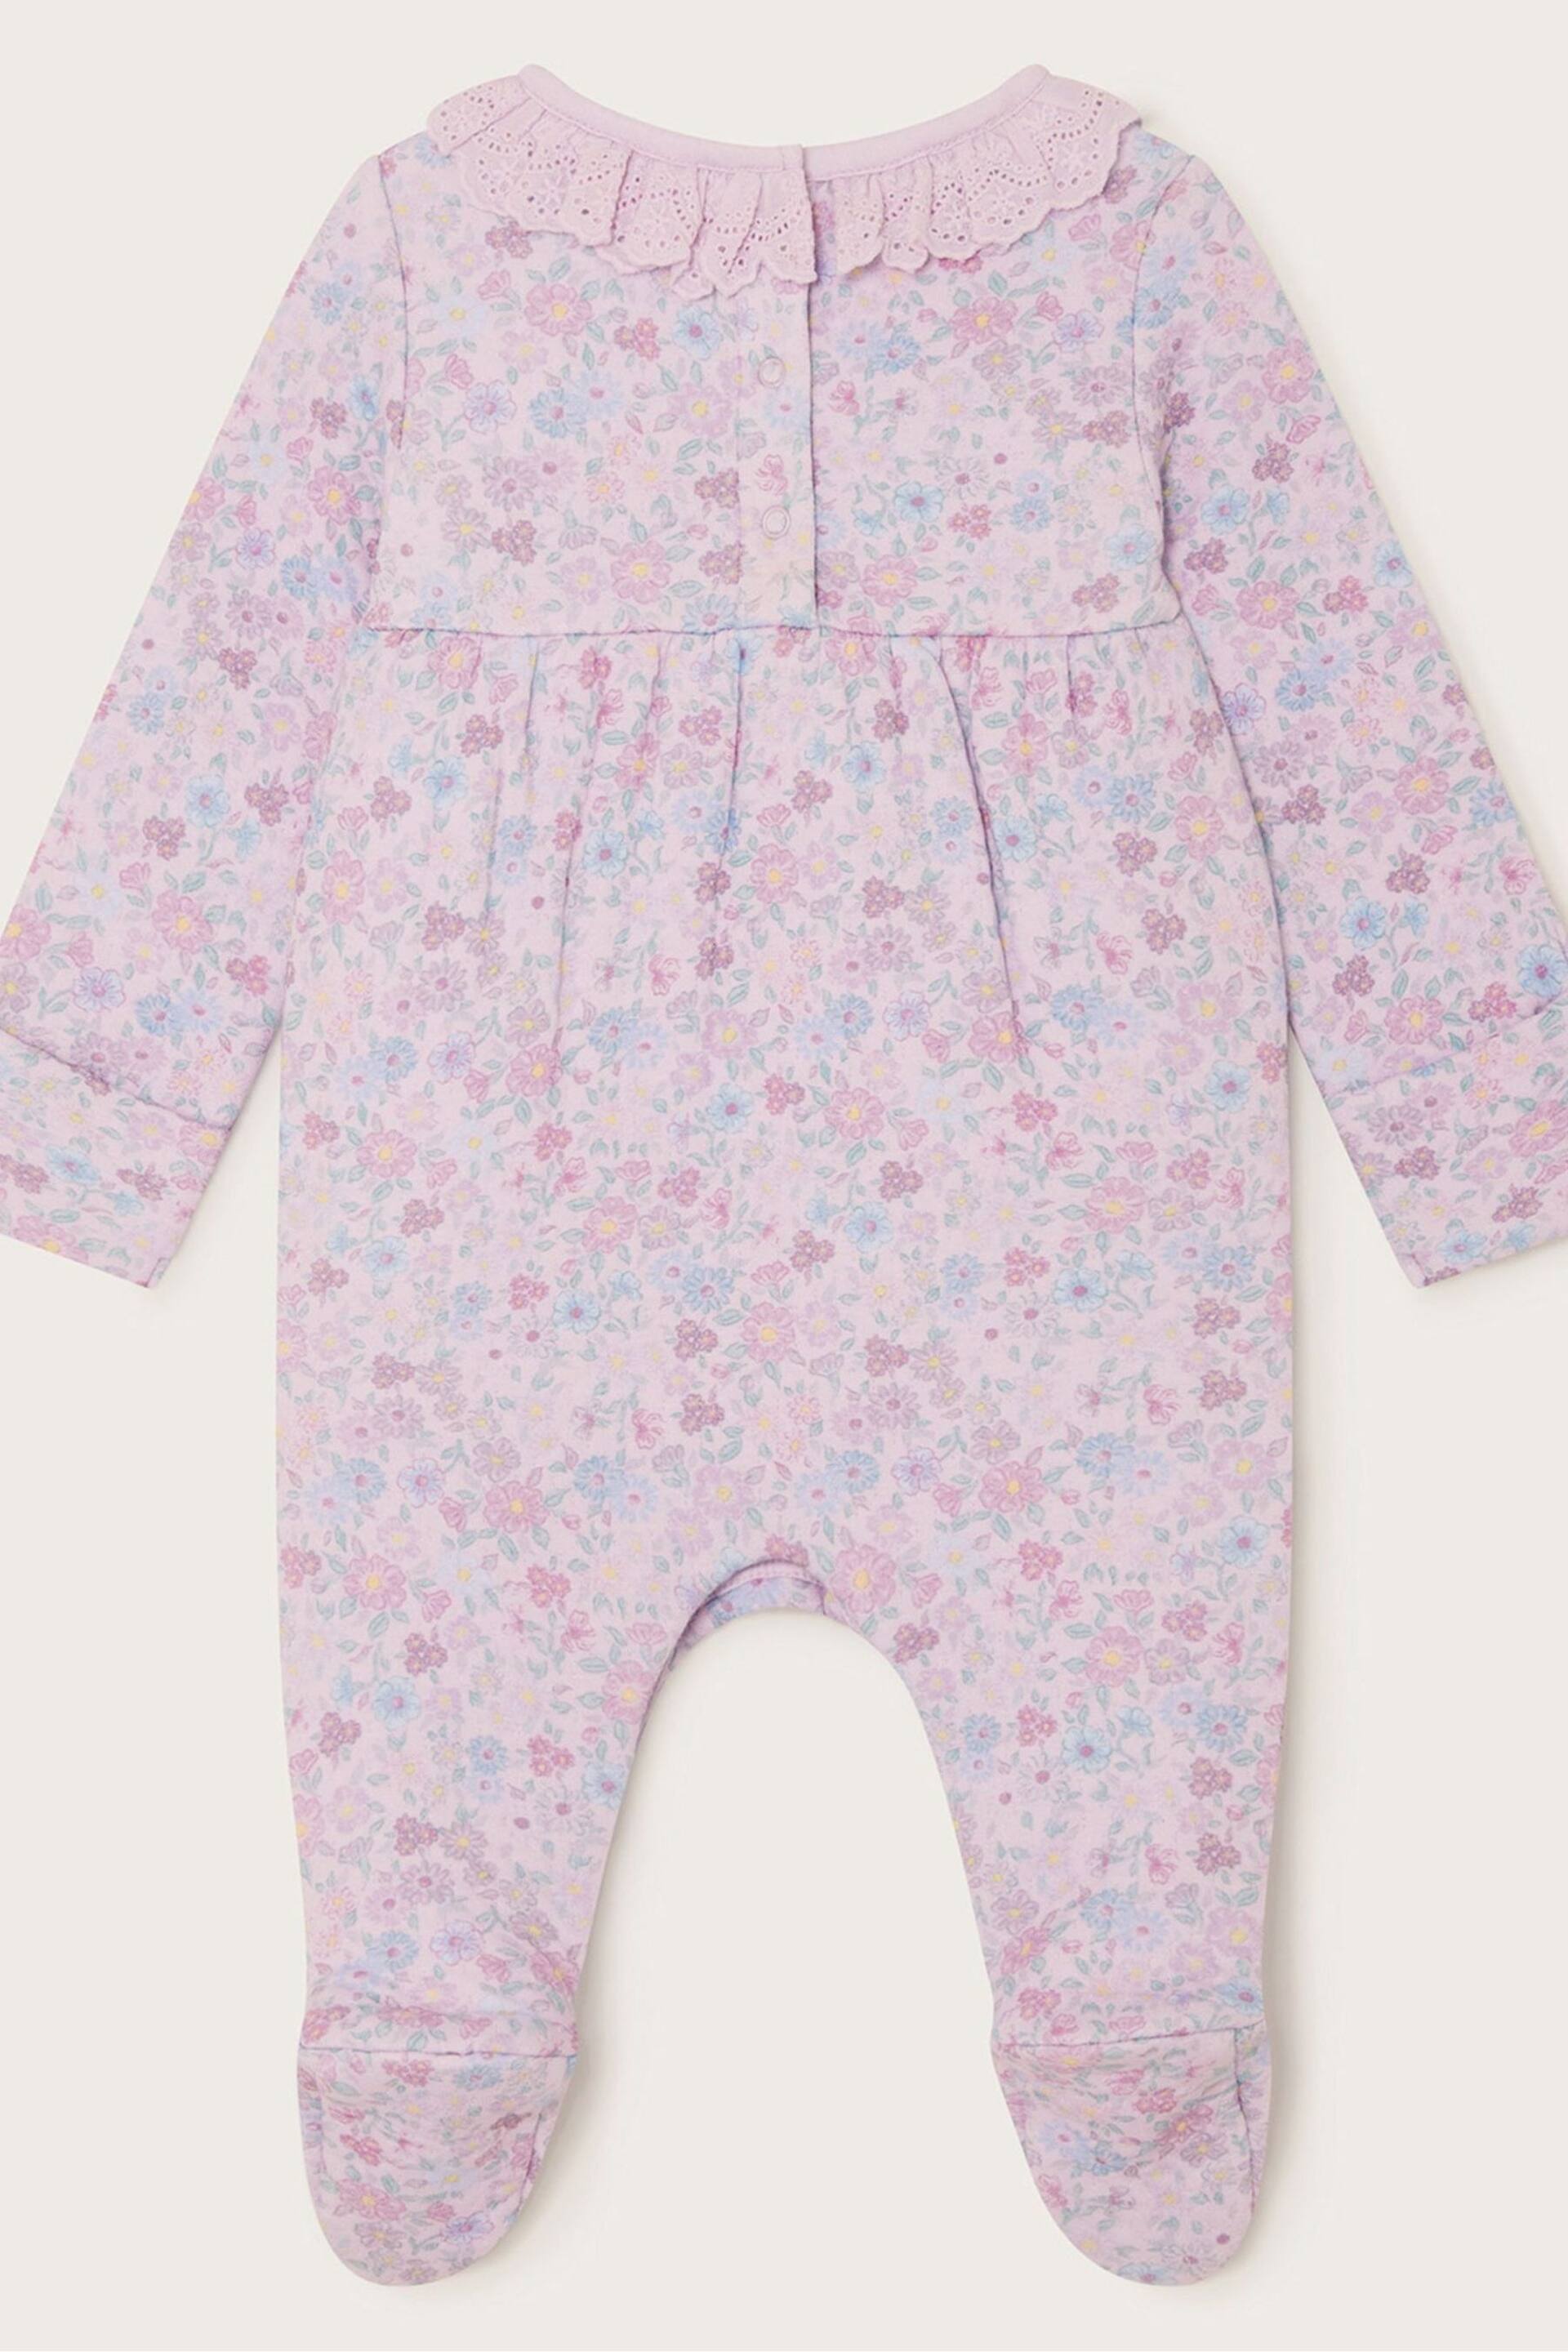 Monsoon Pink Newborn Ditsy Quilted Sleepsuit - Image 2 of 3